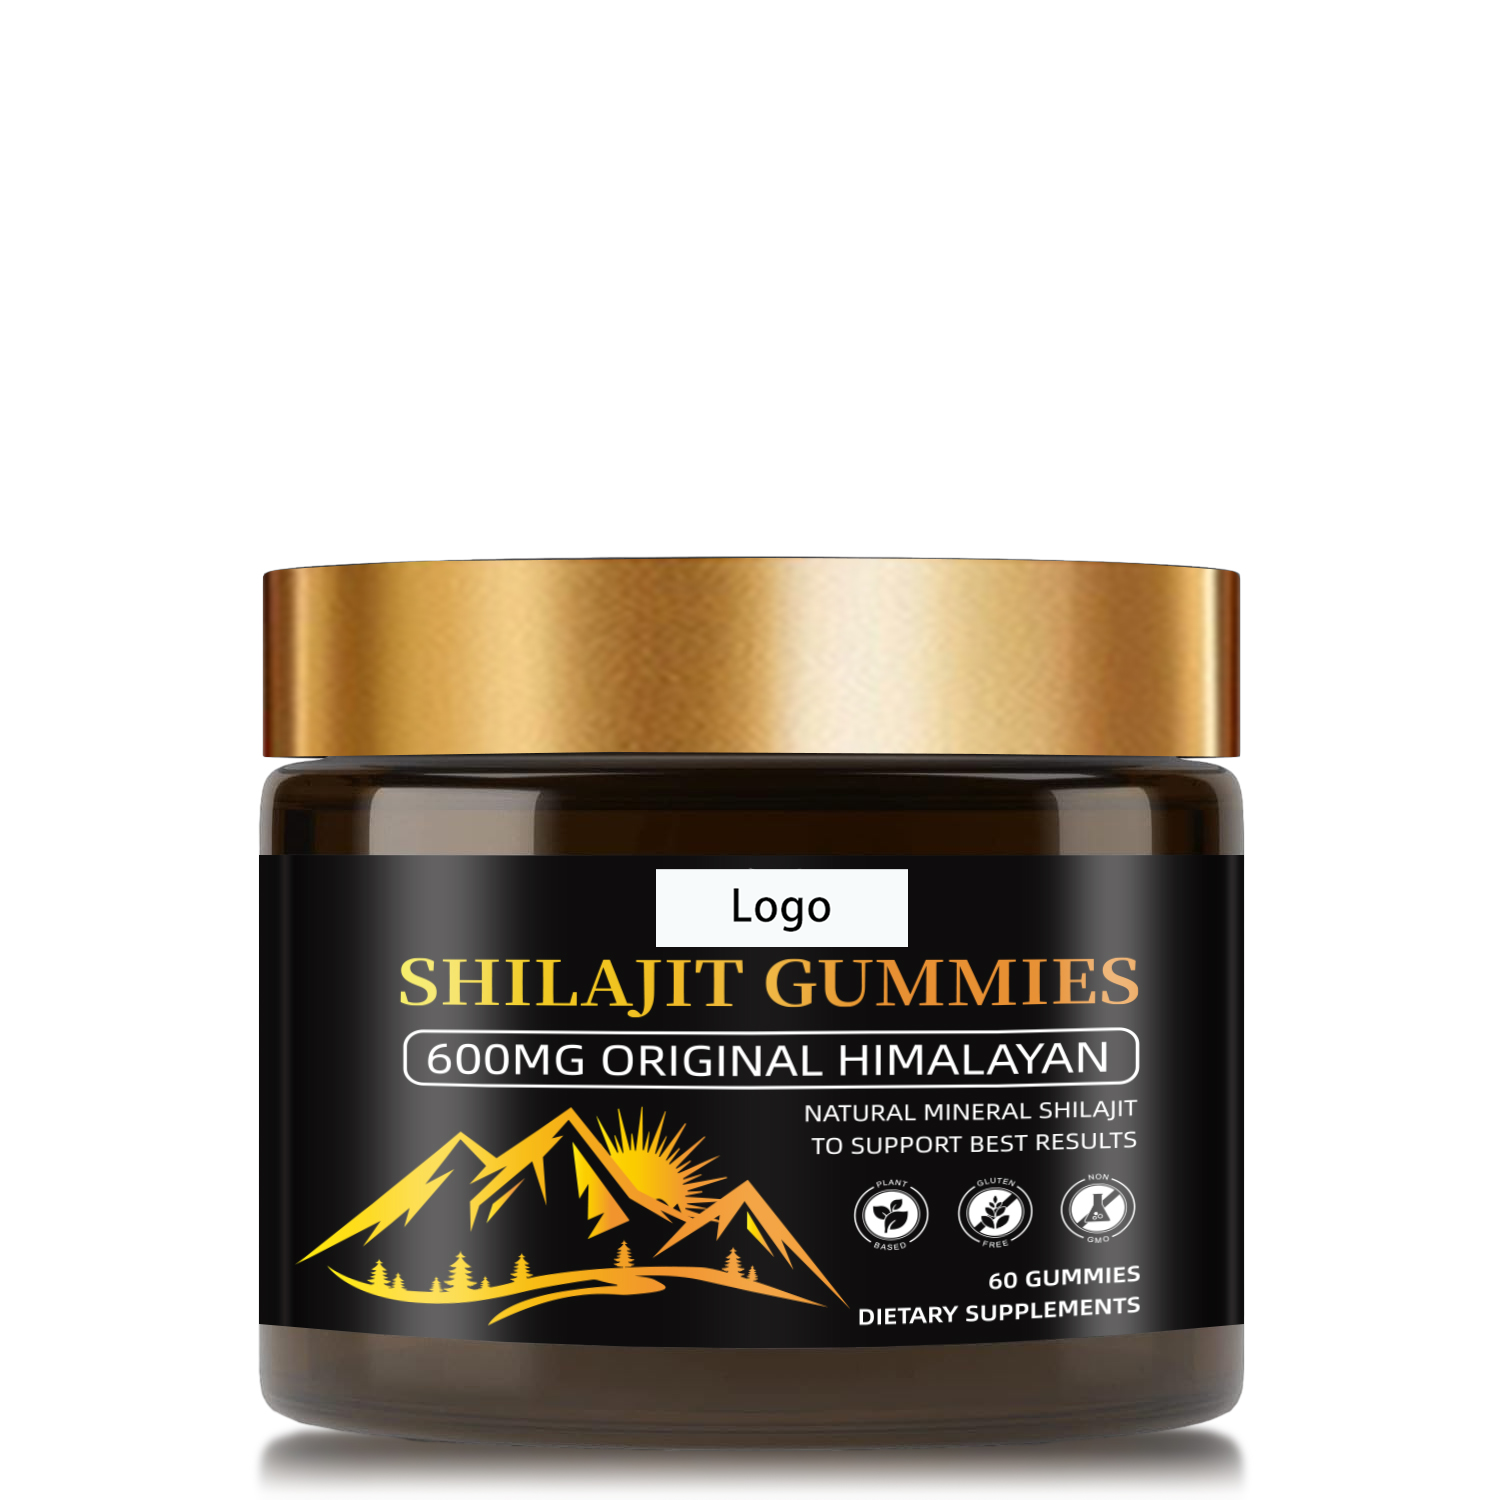 Shilajit Pure Himalayan Organic Shilajit Resin - 600mg Maximum Potency Natural Organic Shilajit Resin with 85+ Trace Minerals & Fulvic Acid for Energy, Immune Support, 30 Grams (1 Pack)